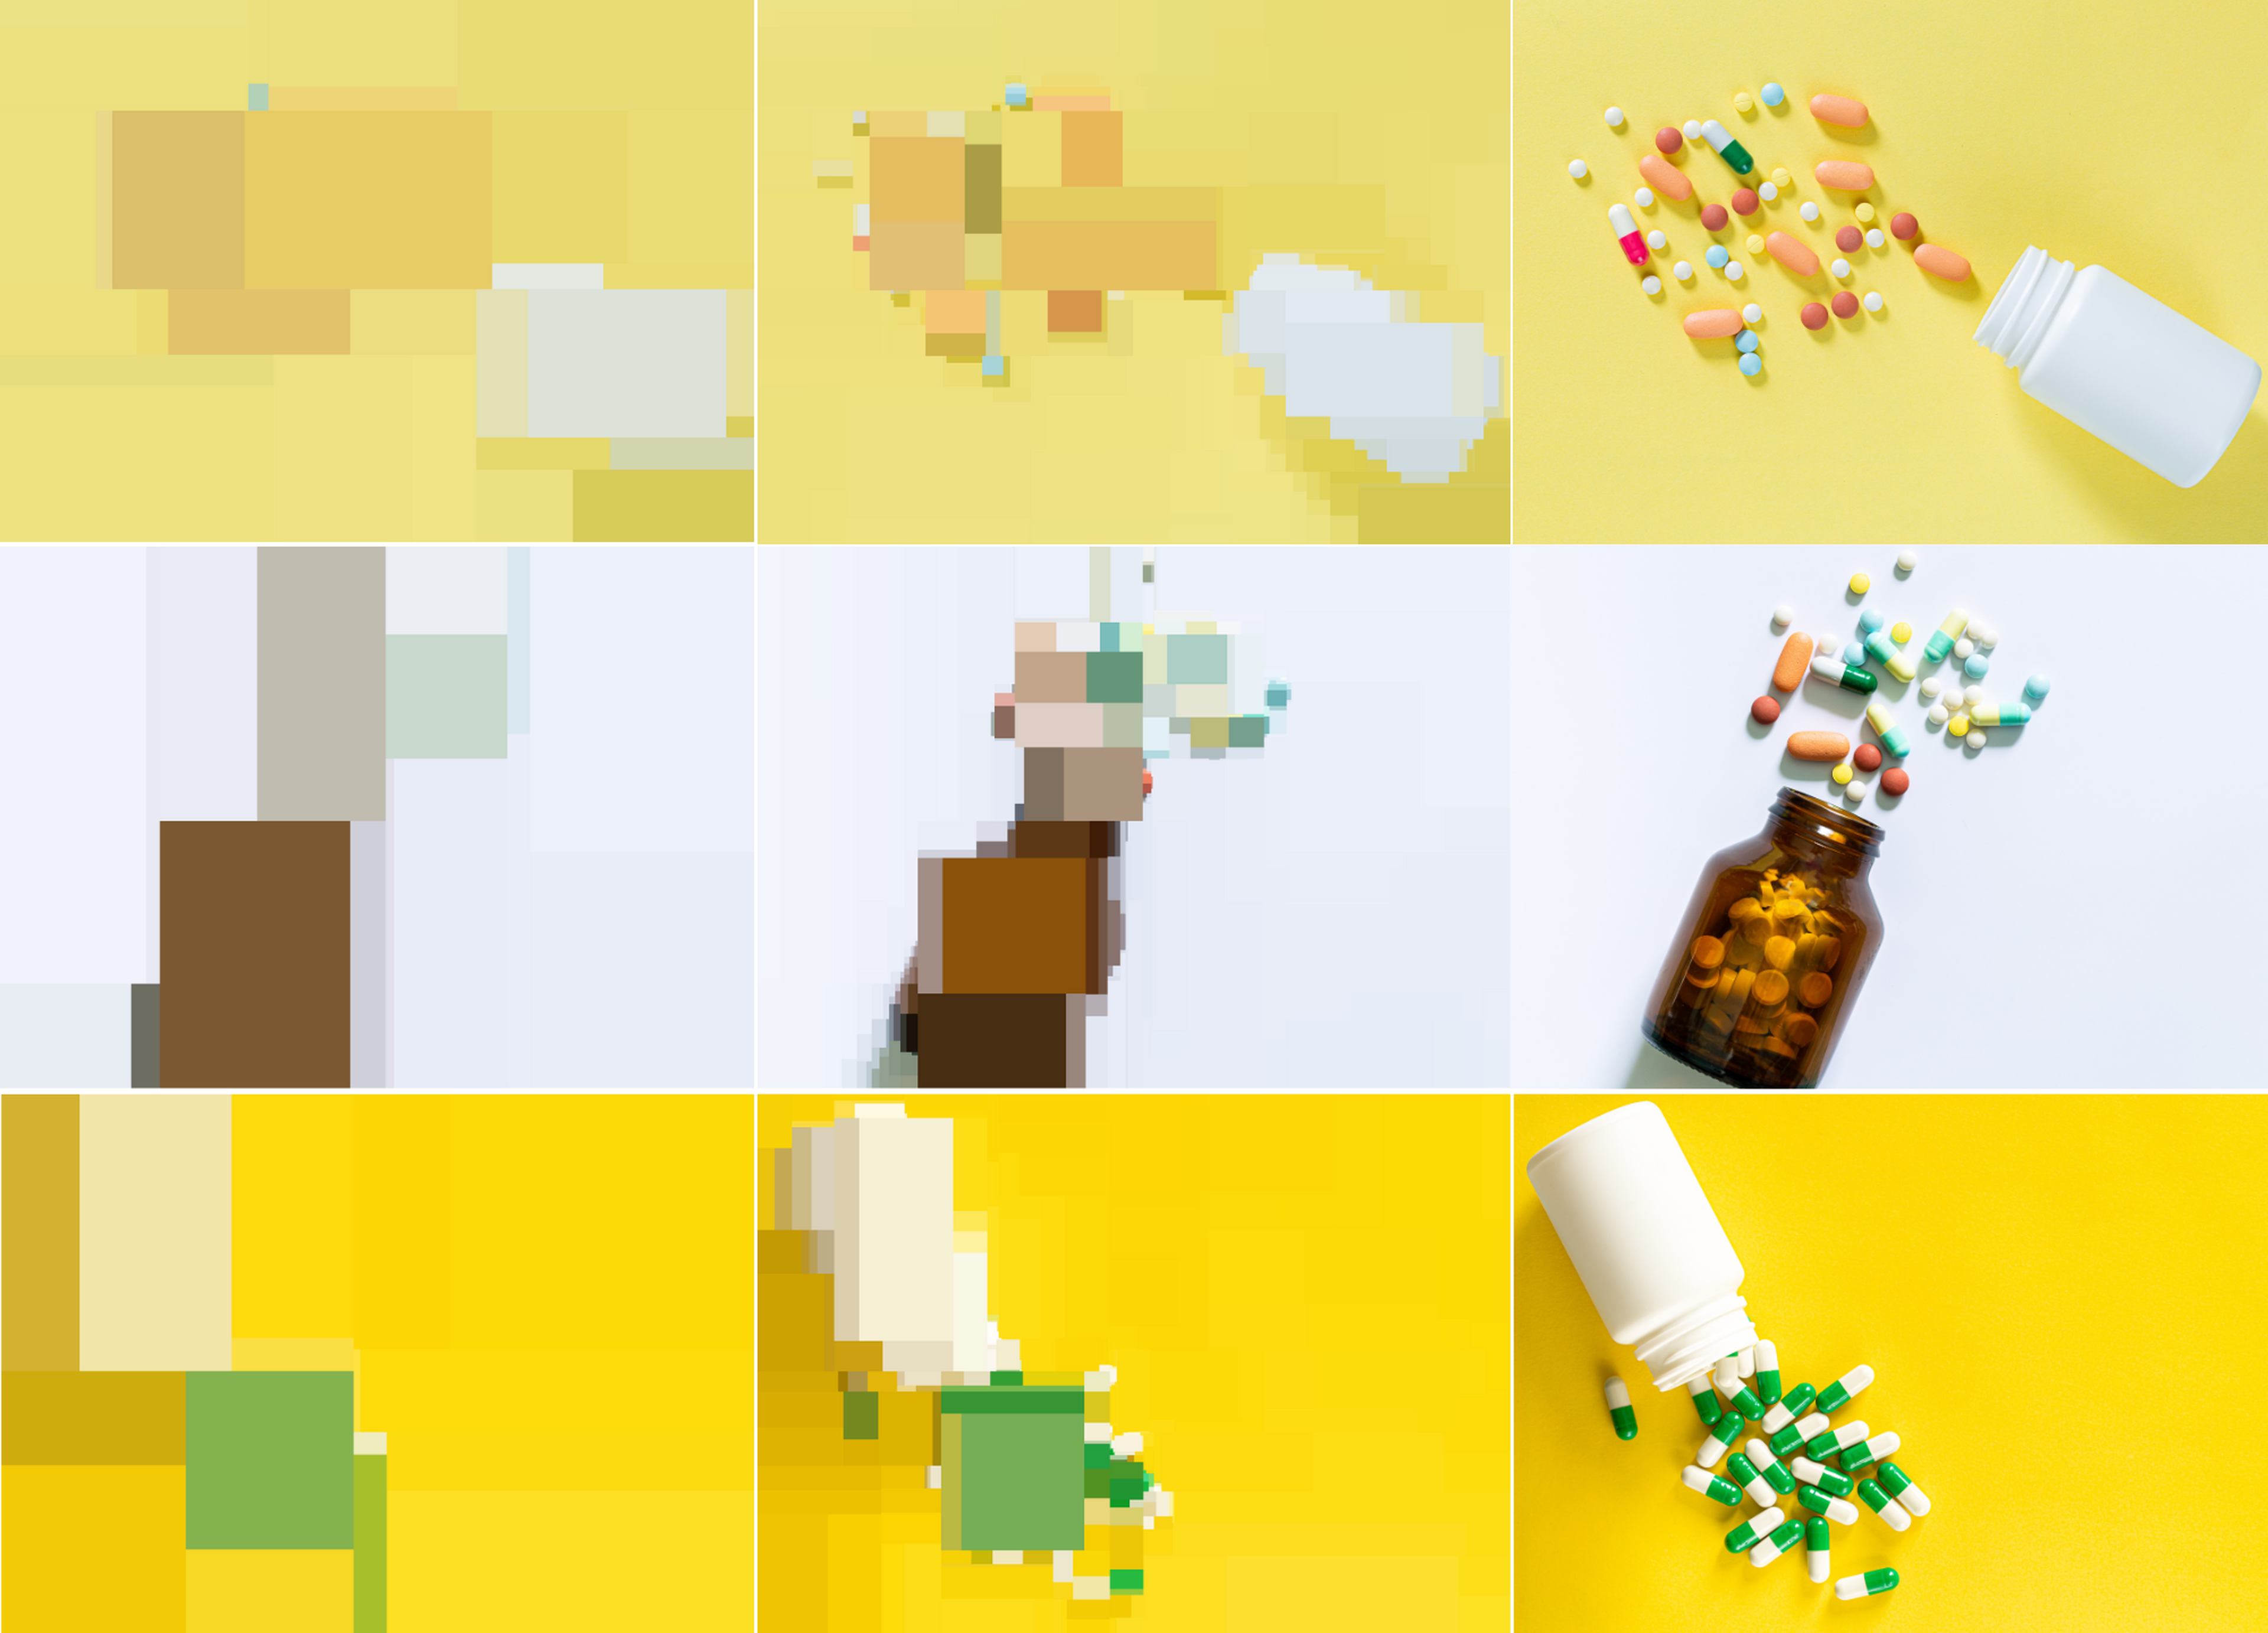 This picture is made up of 9 images in rows of 3. Each row shows a different image of a pill bottle spilling out pills onto a plain surface, on yellow or white backgrounds. On one side, the image is an original photograph. The next two iterations show it getting represented in progressively larger blocks of colour.